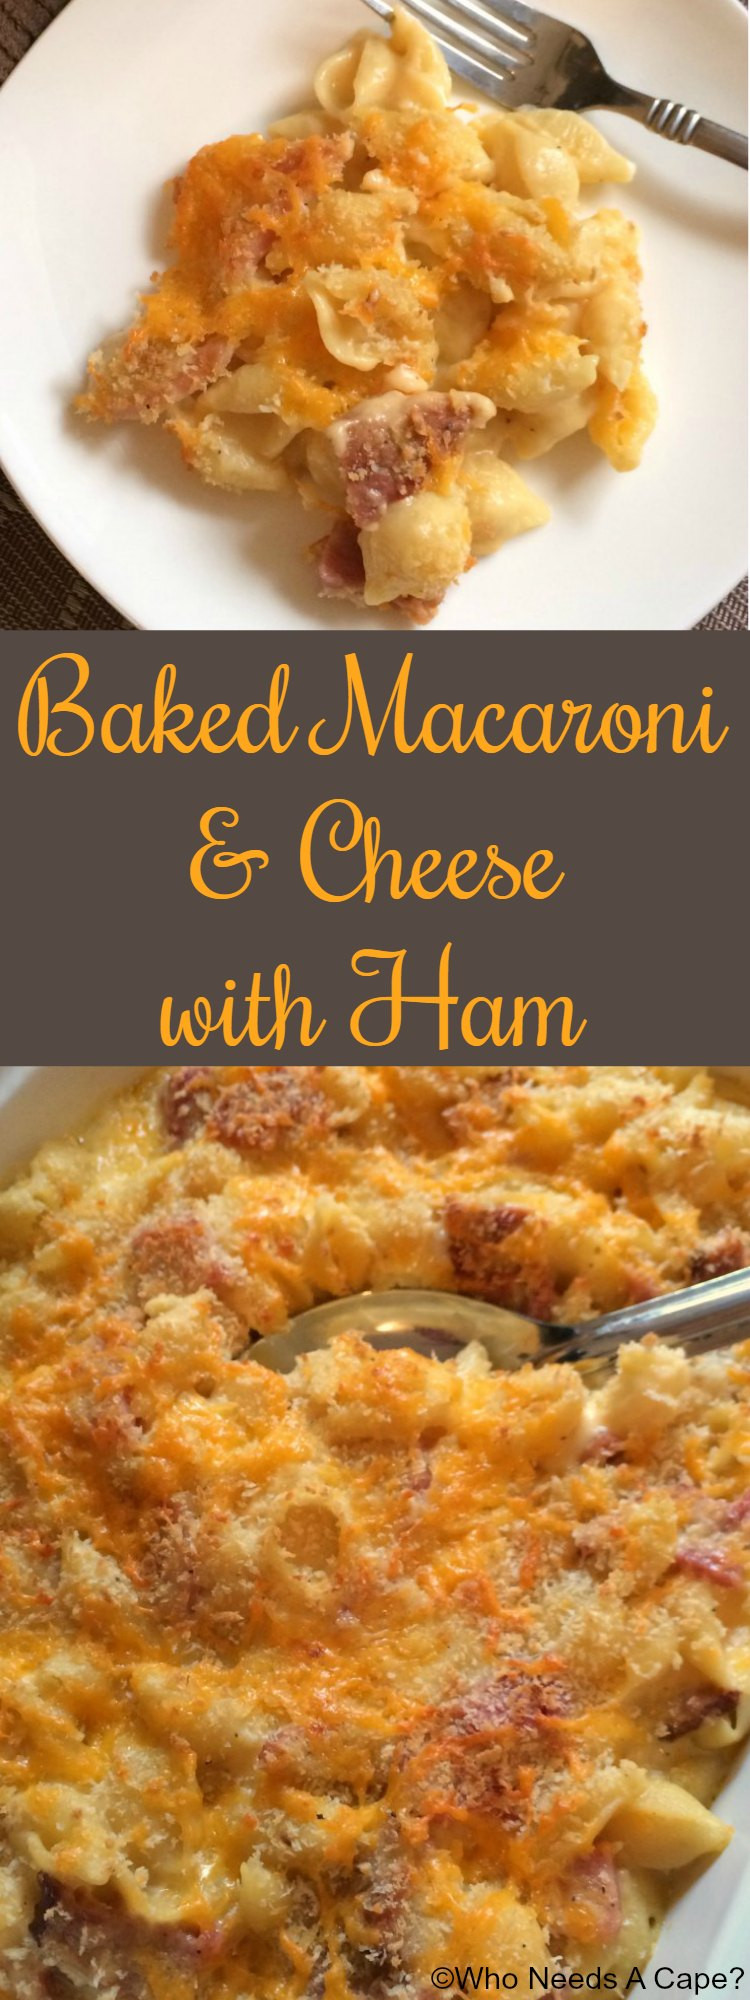 Baked Macaroni And Cheese With Ham Recipe
 Baked Macaroni & Cheese with Ham